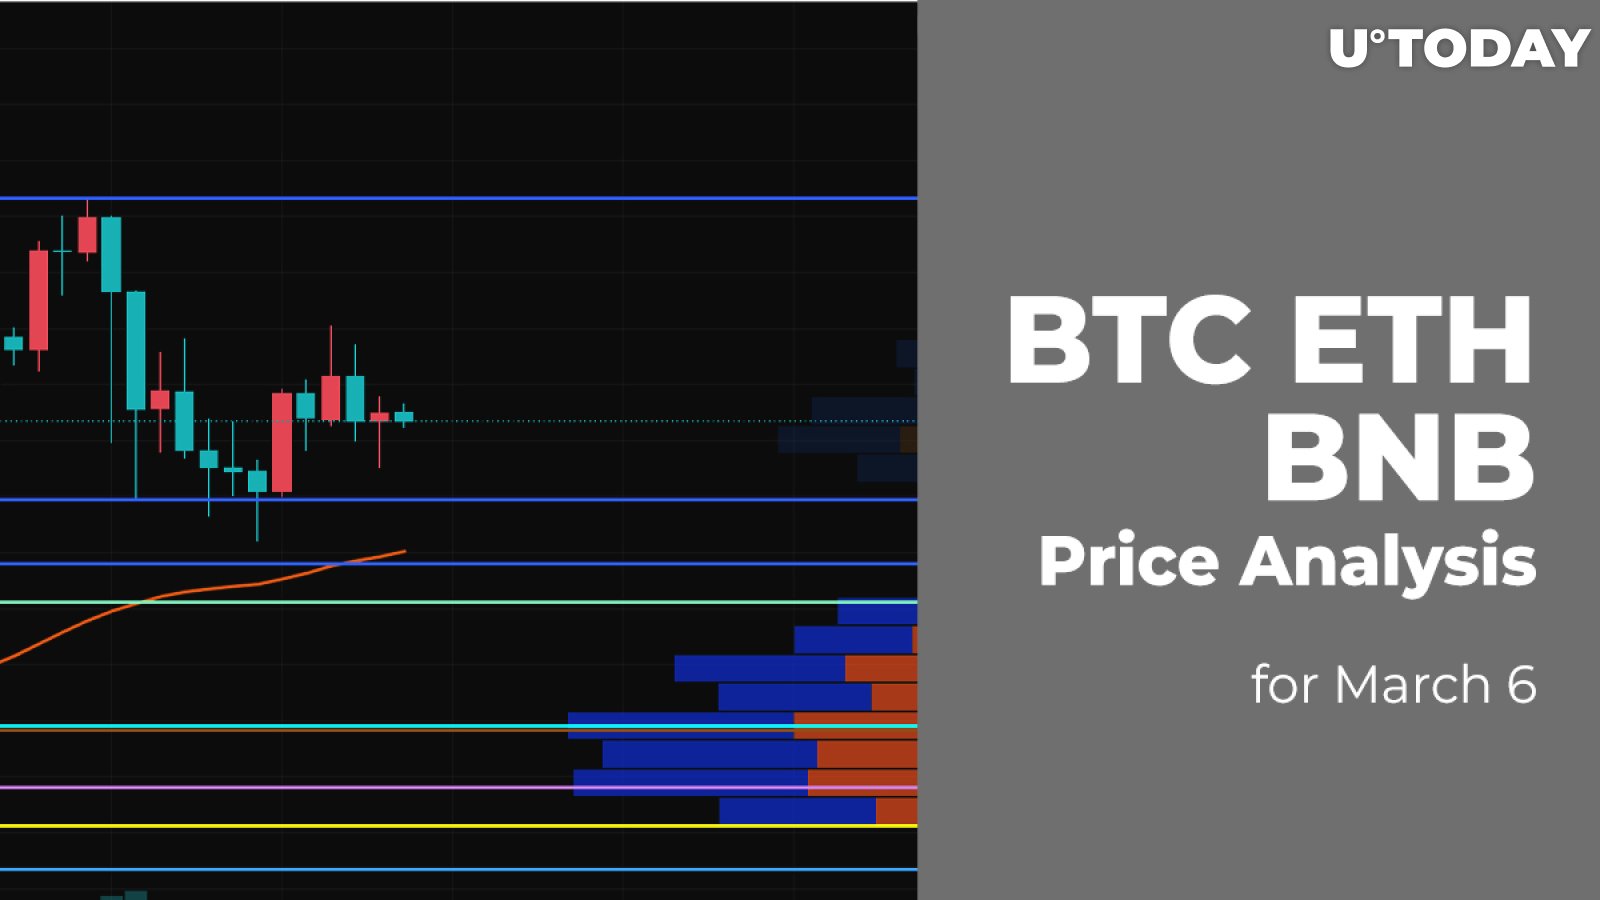 BTC, ETH and BNB Price Analysis for March 6